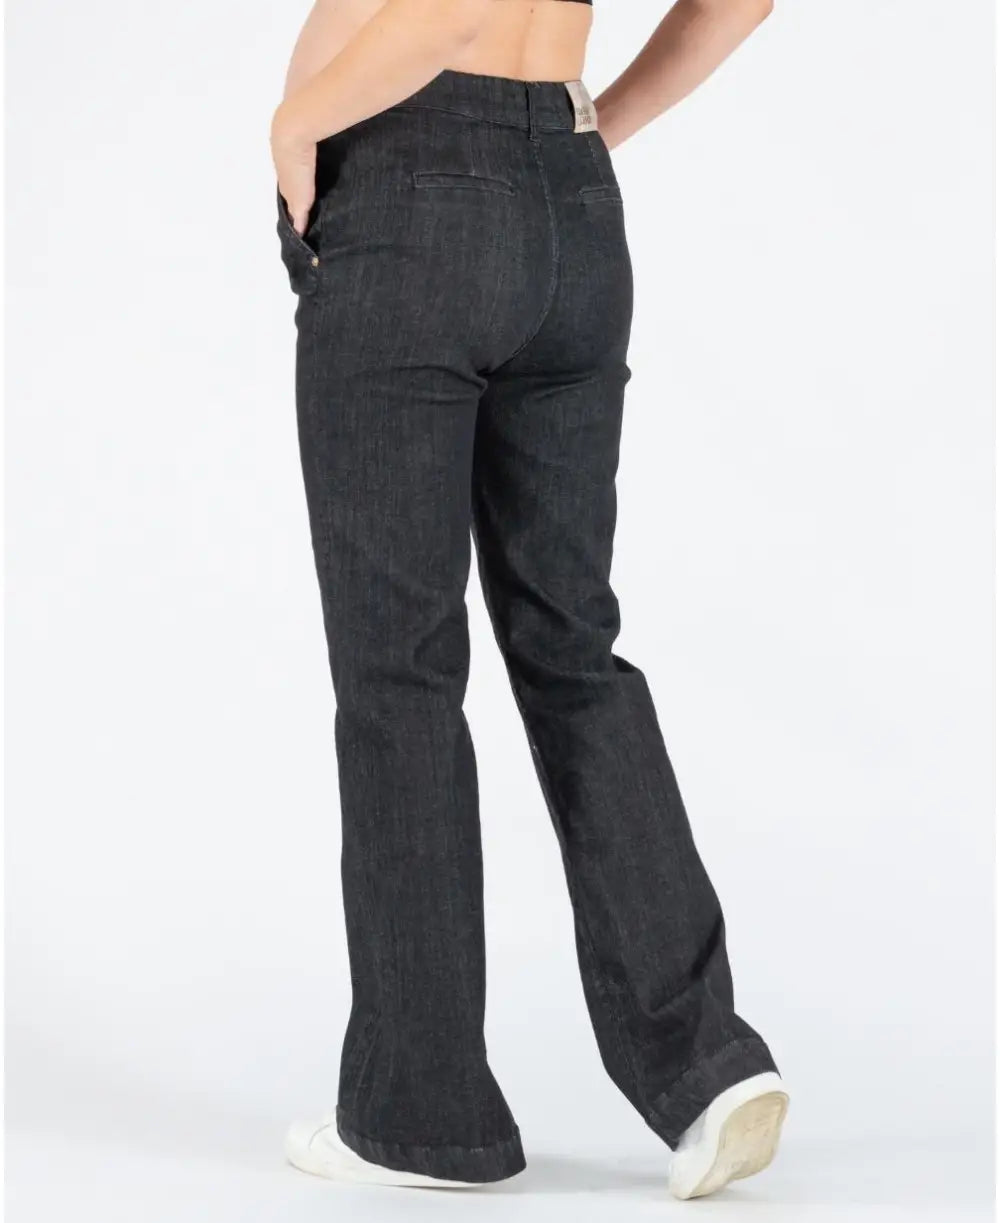 Sabrina black flare pregnancy and post partum jeans